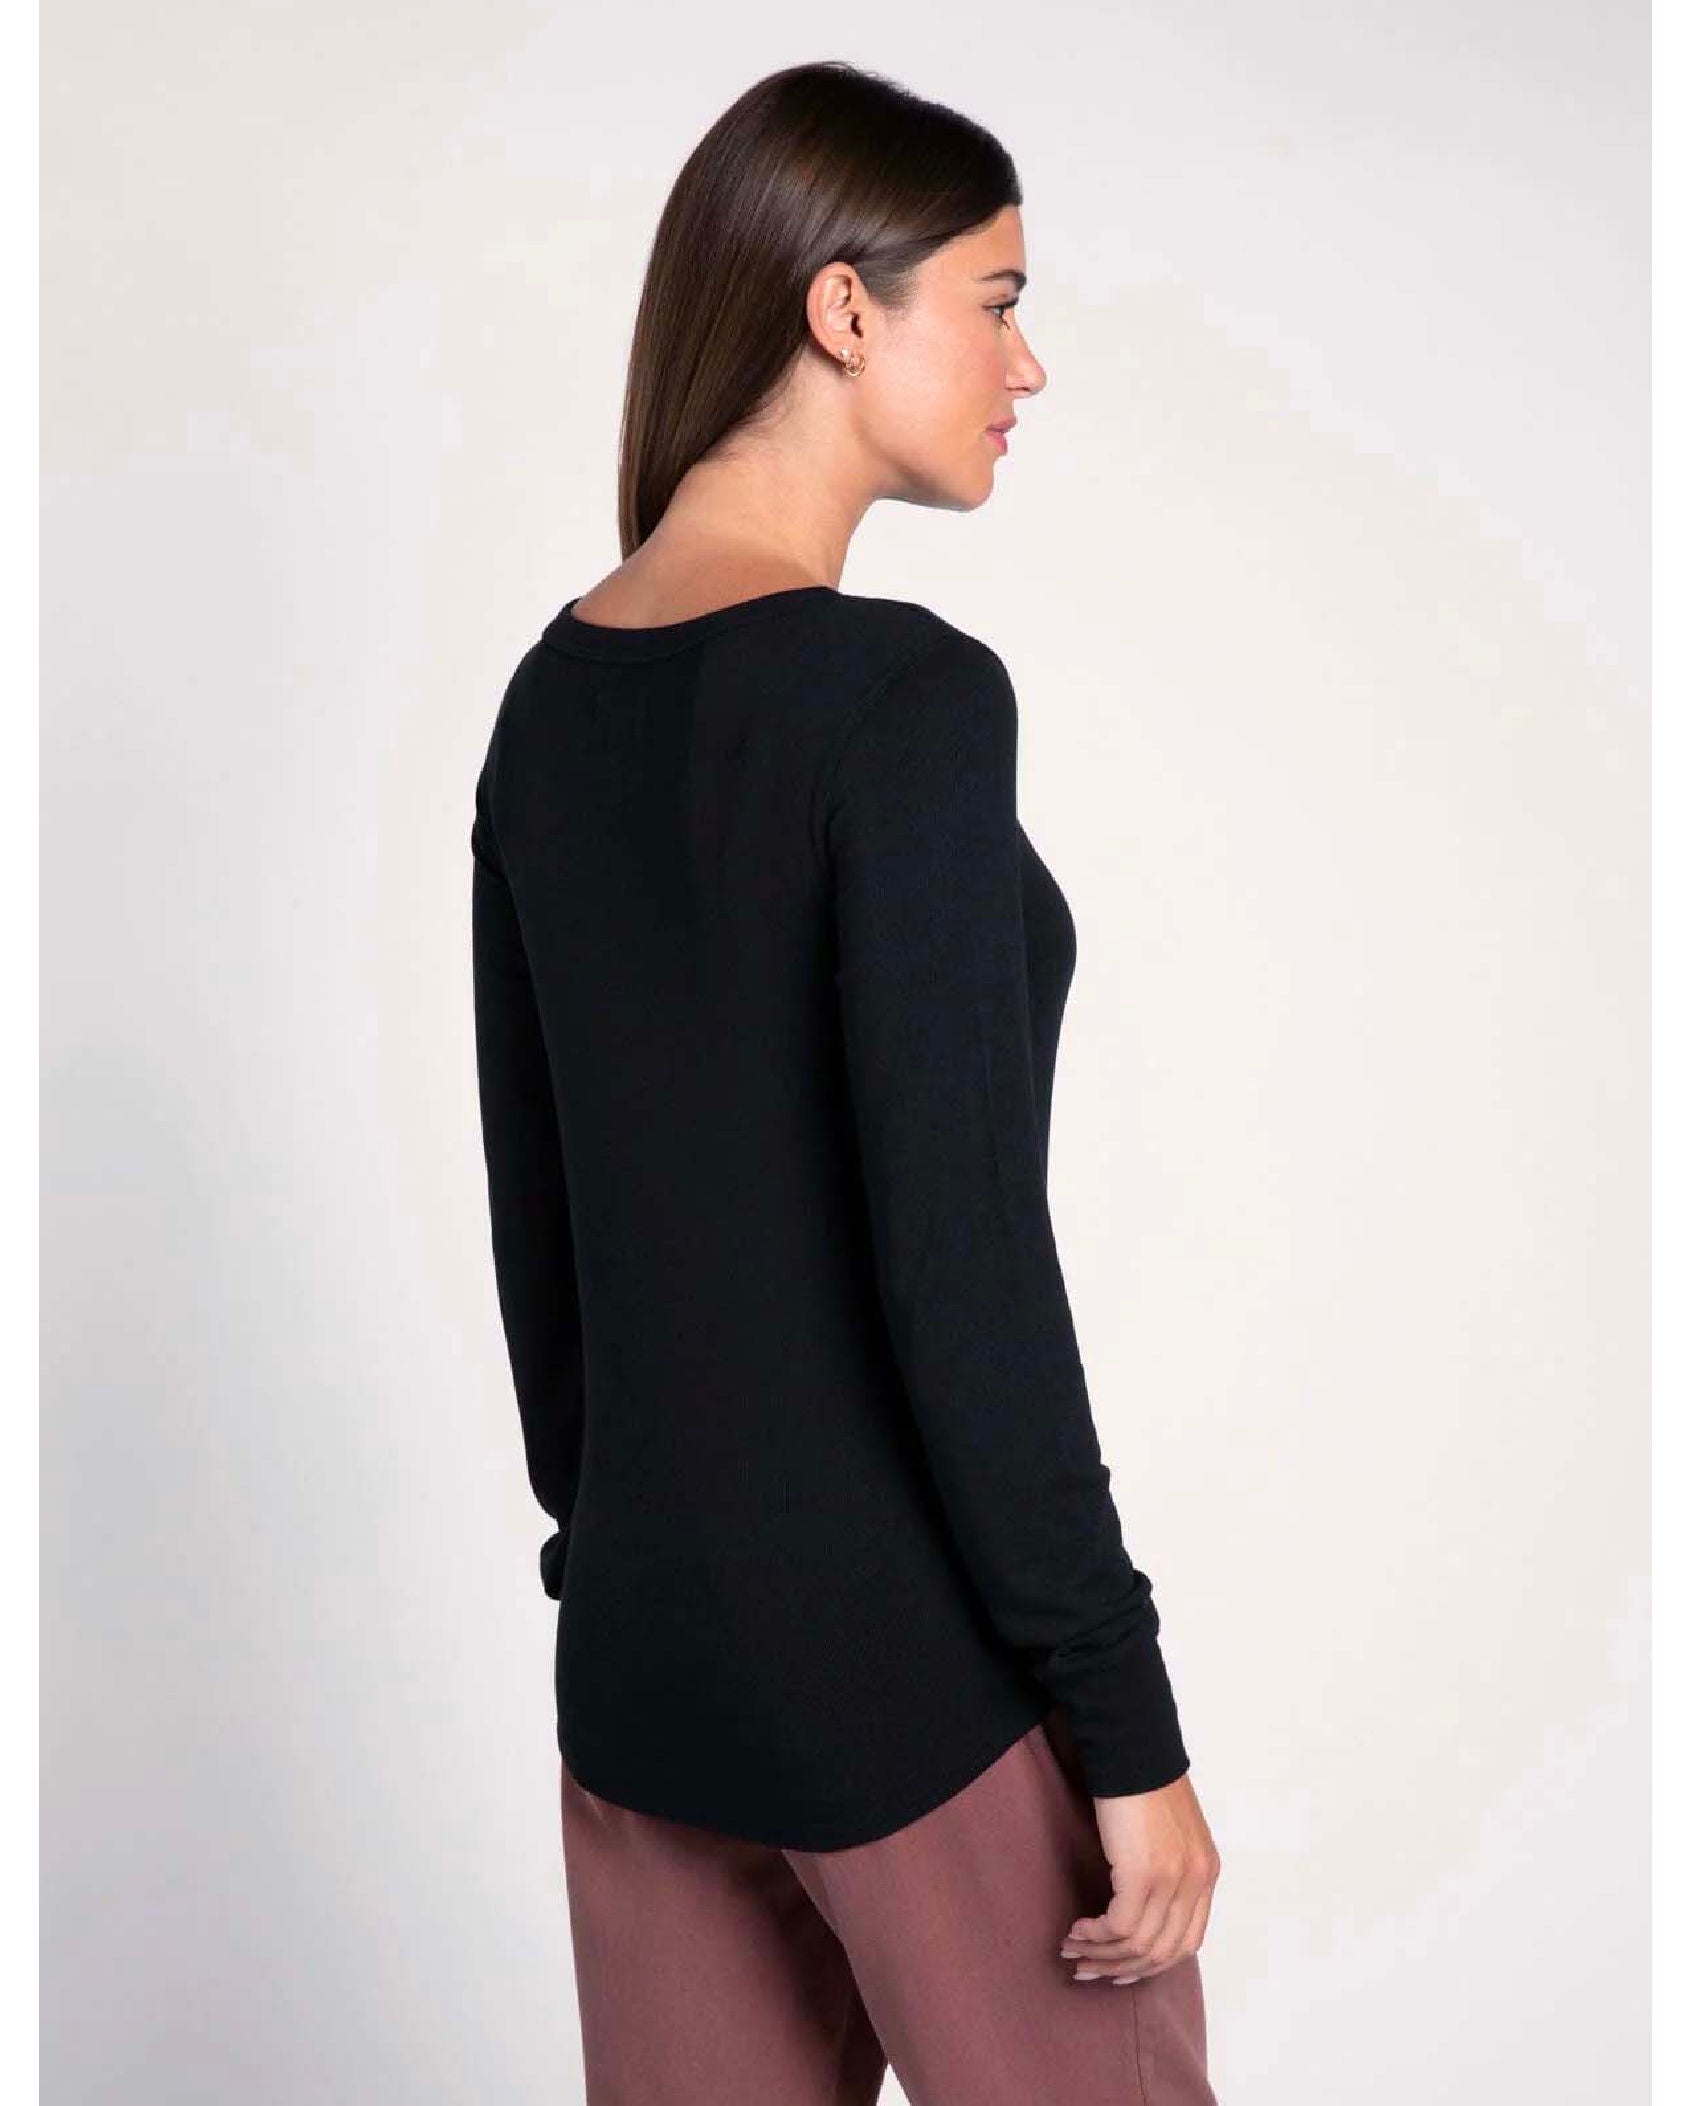 Stacey Long Sleeve Black